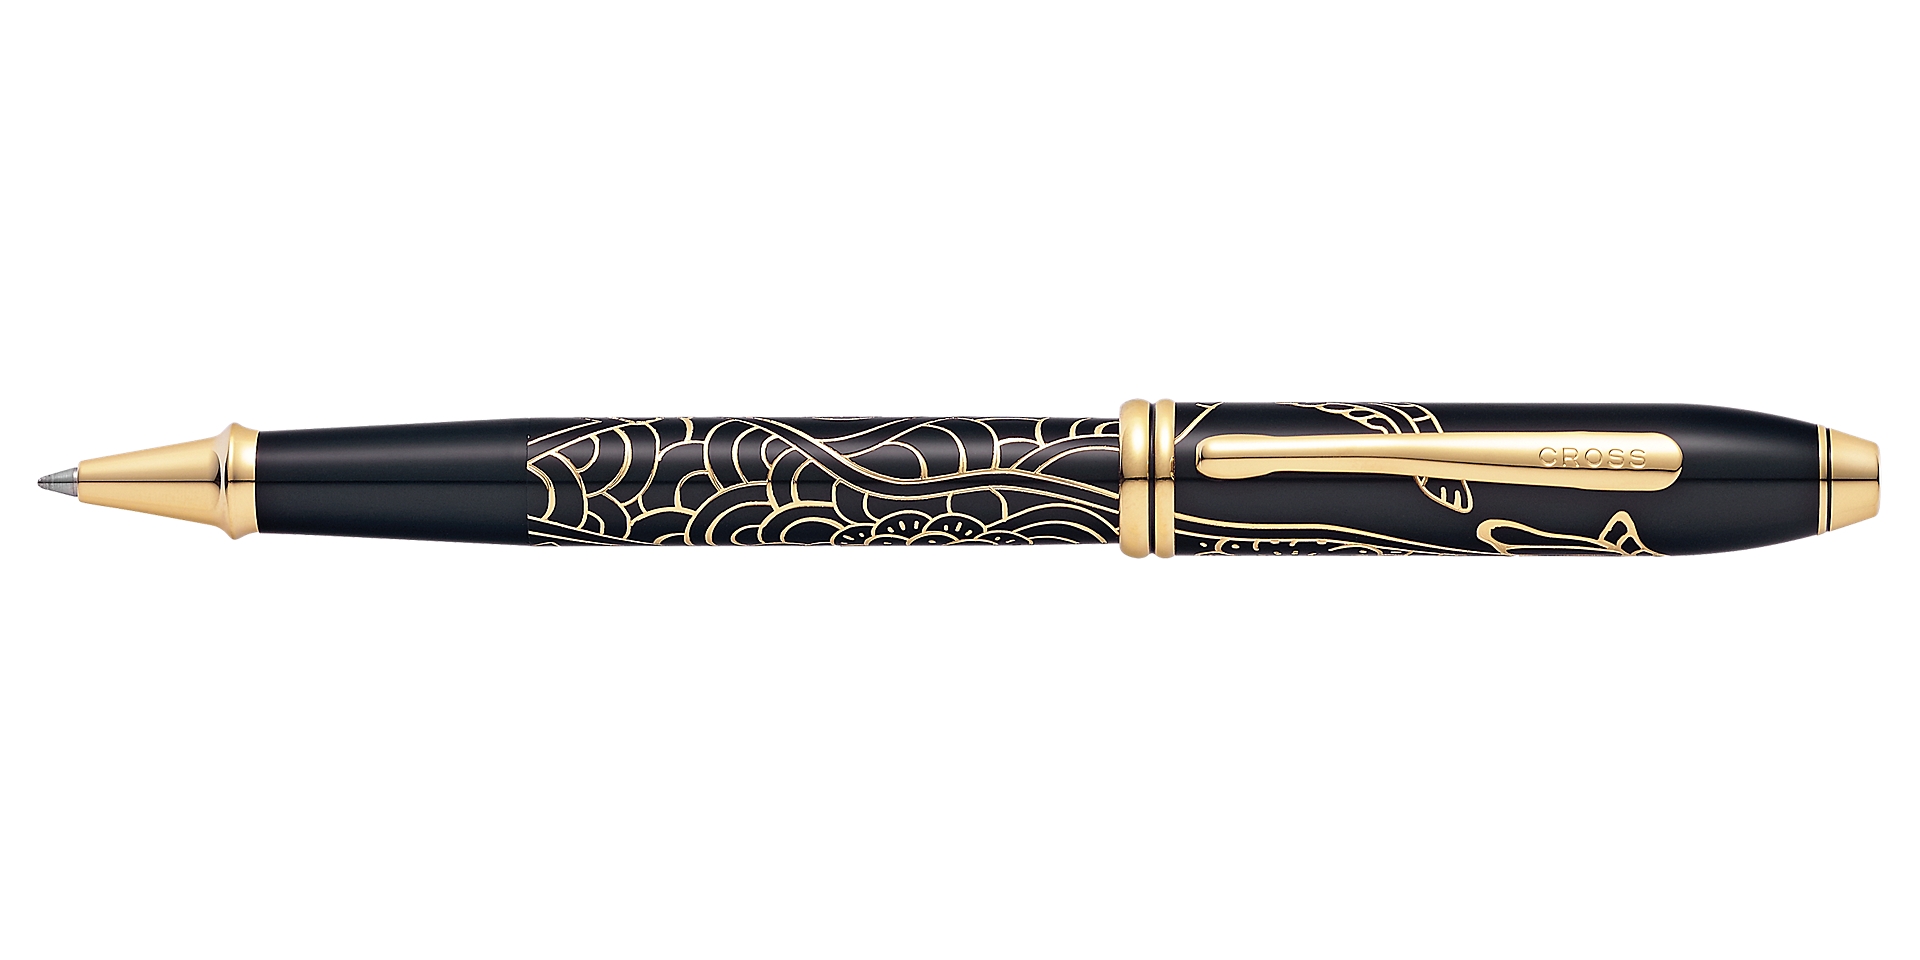  Cross 2018 Year of the Dog Special-Edition Rollerball Pen